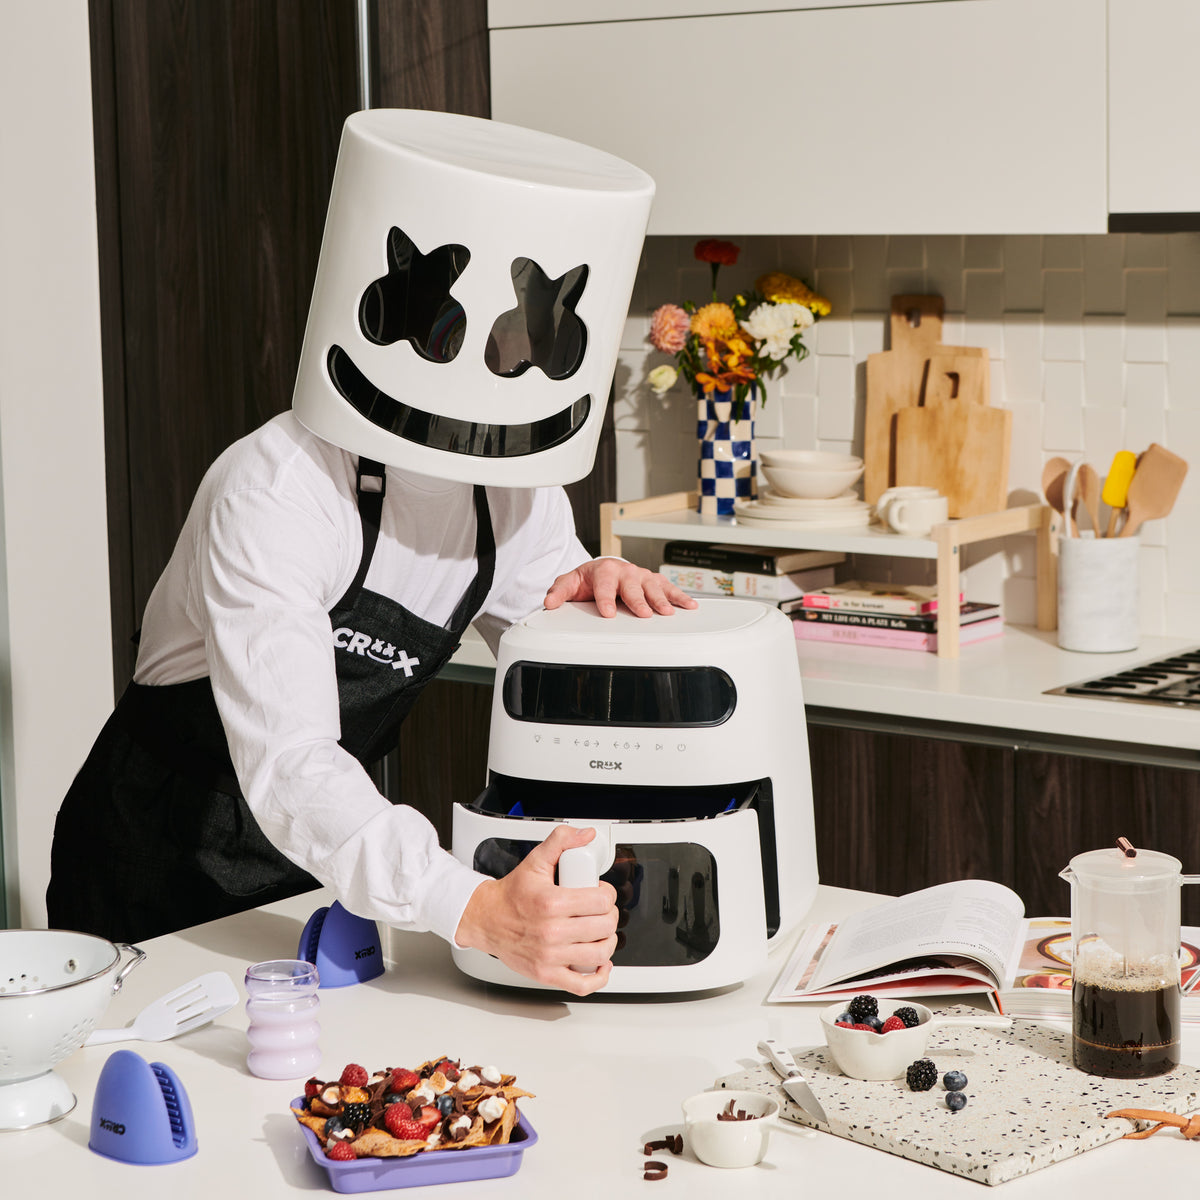 Marshmello Partners with Crux for New Collection of Air Fryers